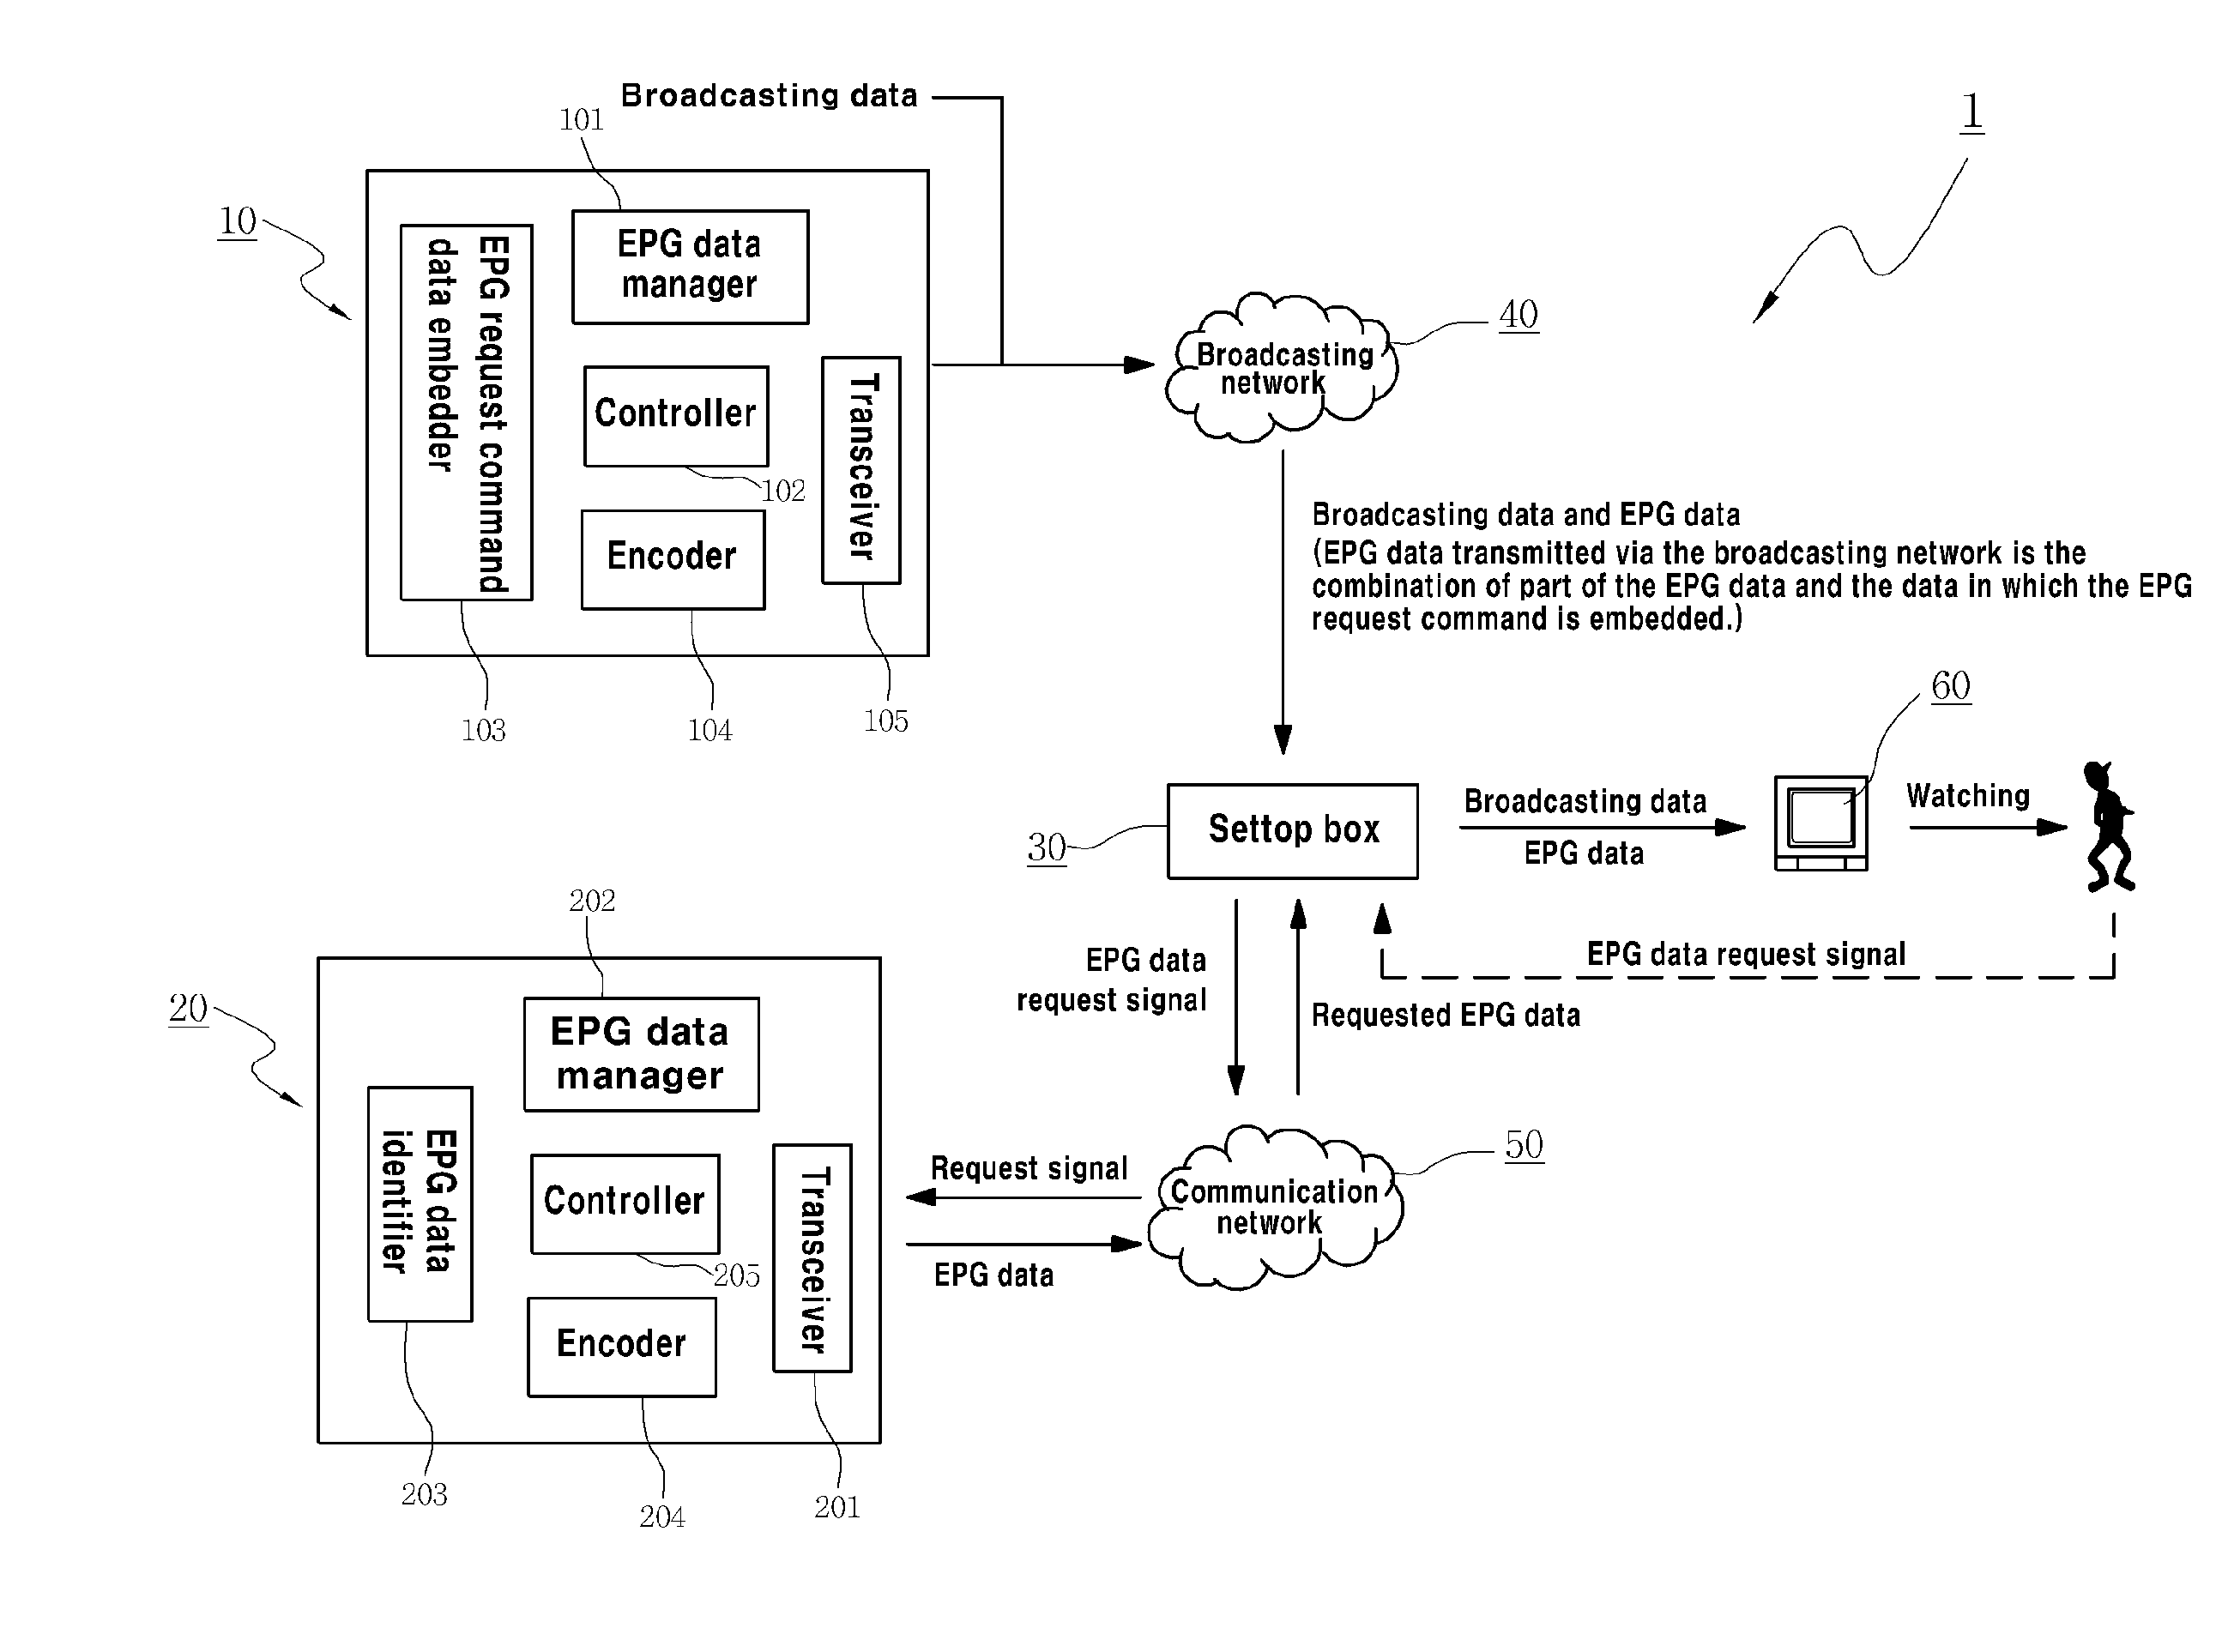 System and Method for the Construction of Electronic Program Guide Through Cooperative Transmission of Electronic Program Guide Data